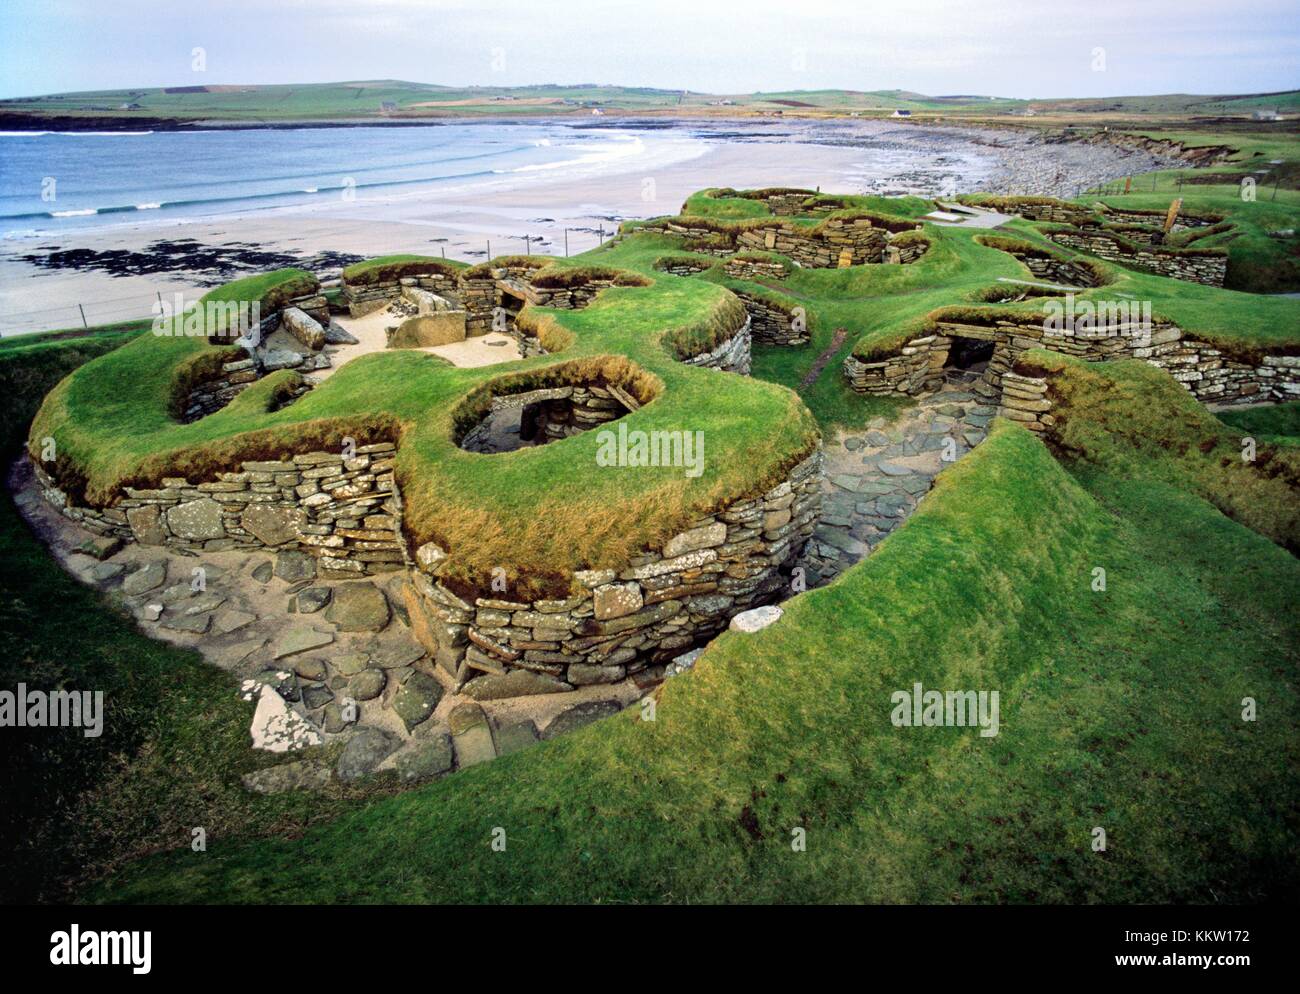 Skara Brae stone age village 3100 BC. Orkney, Scotland. Excavated from sand dune showing individual houses and connecting alleys Stock Photo